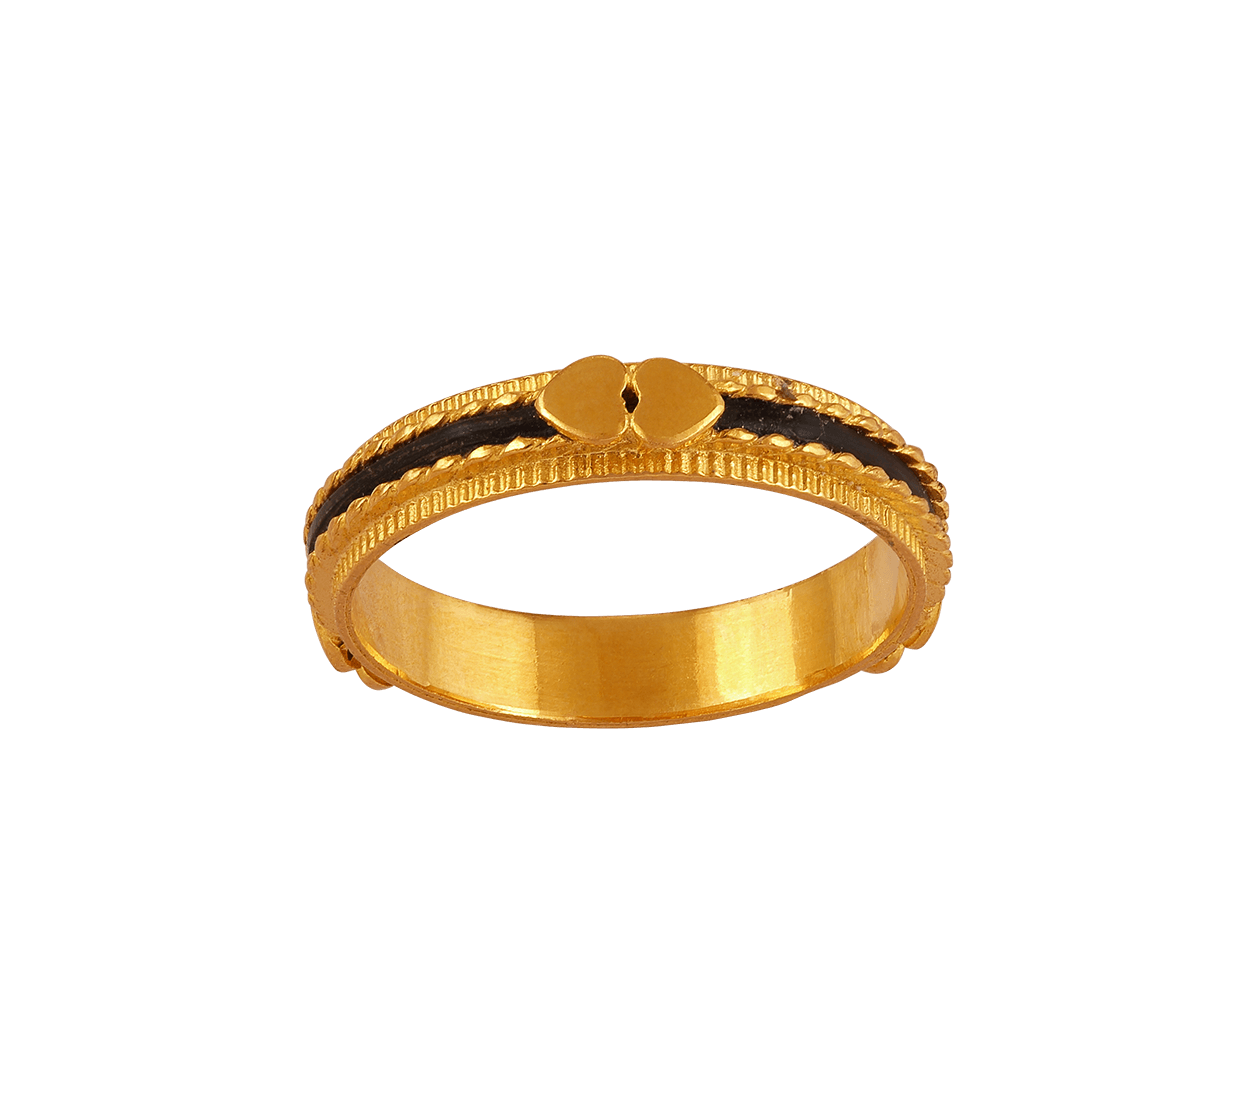 Latest Design of 2 Gram Gold Bangle | Gold bangles design, Gold jewelry  stores, Bridal gold jewellery designs